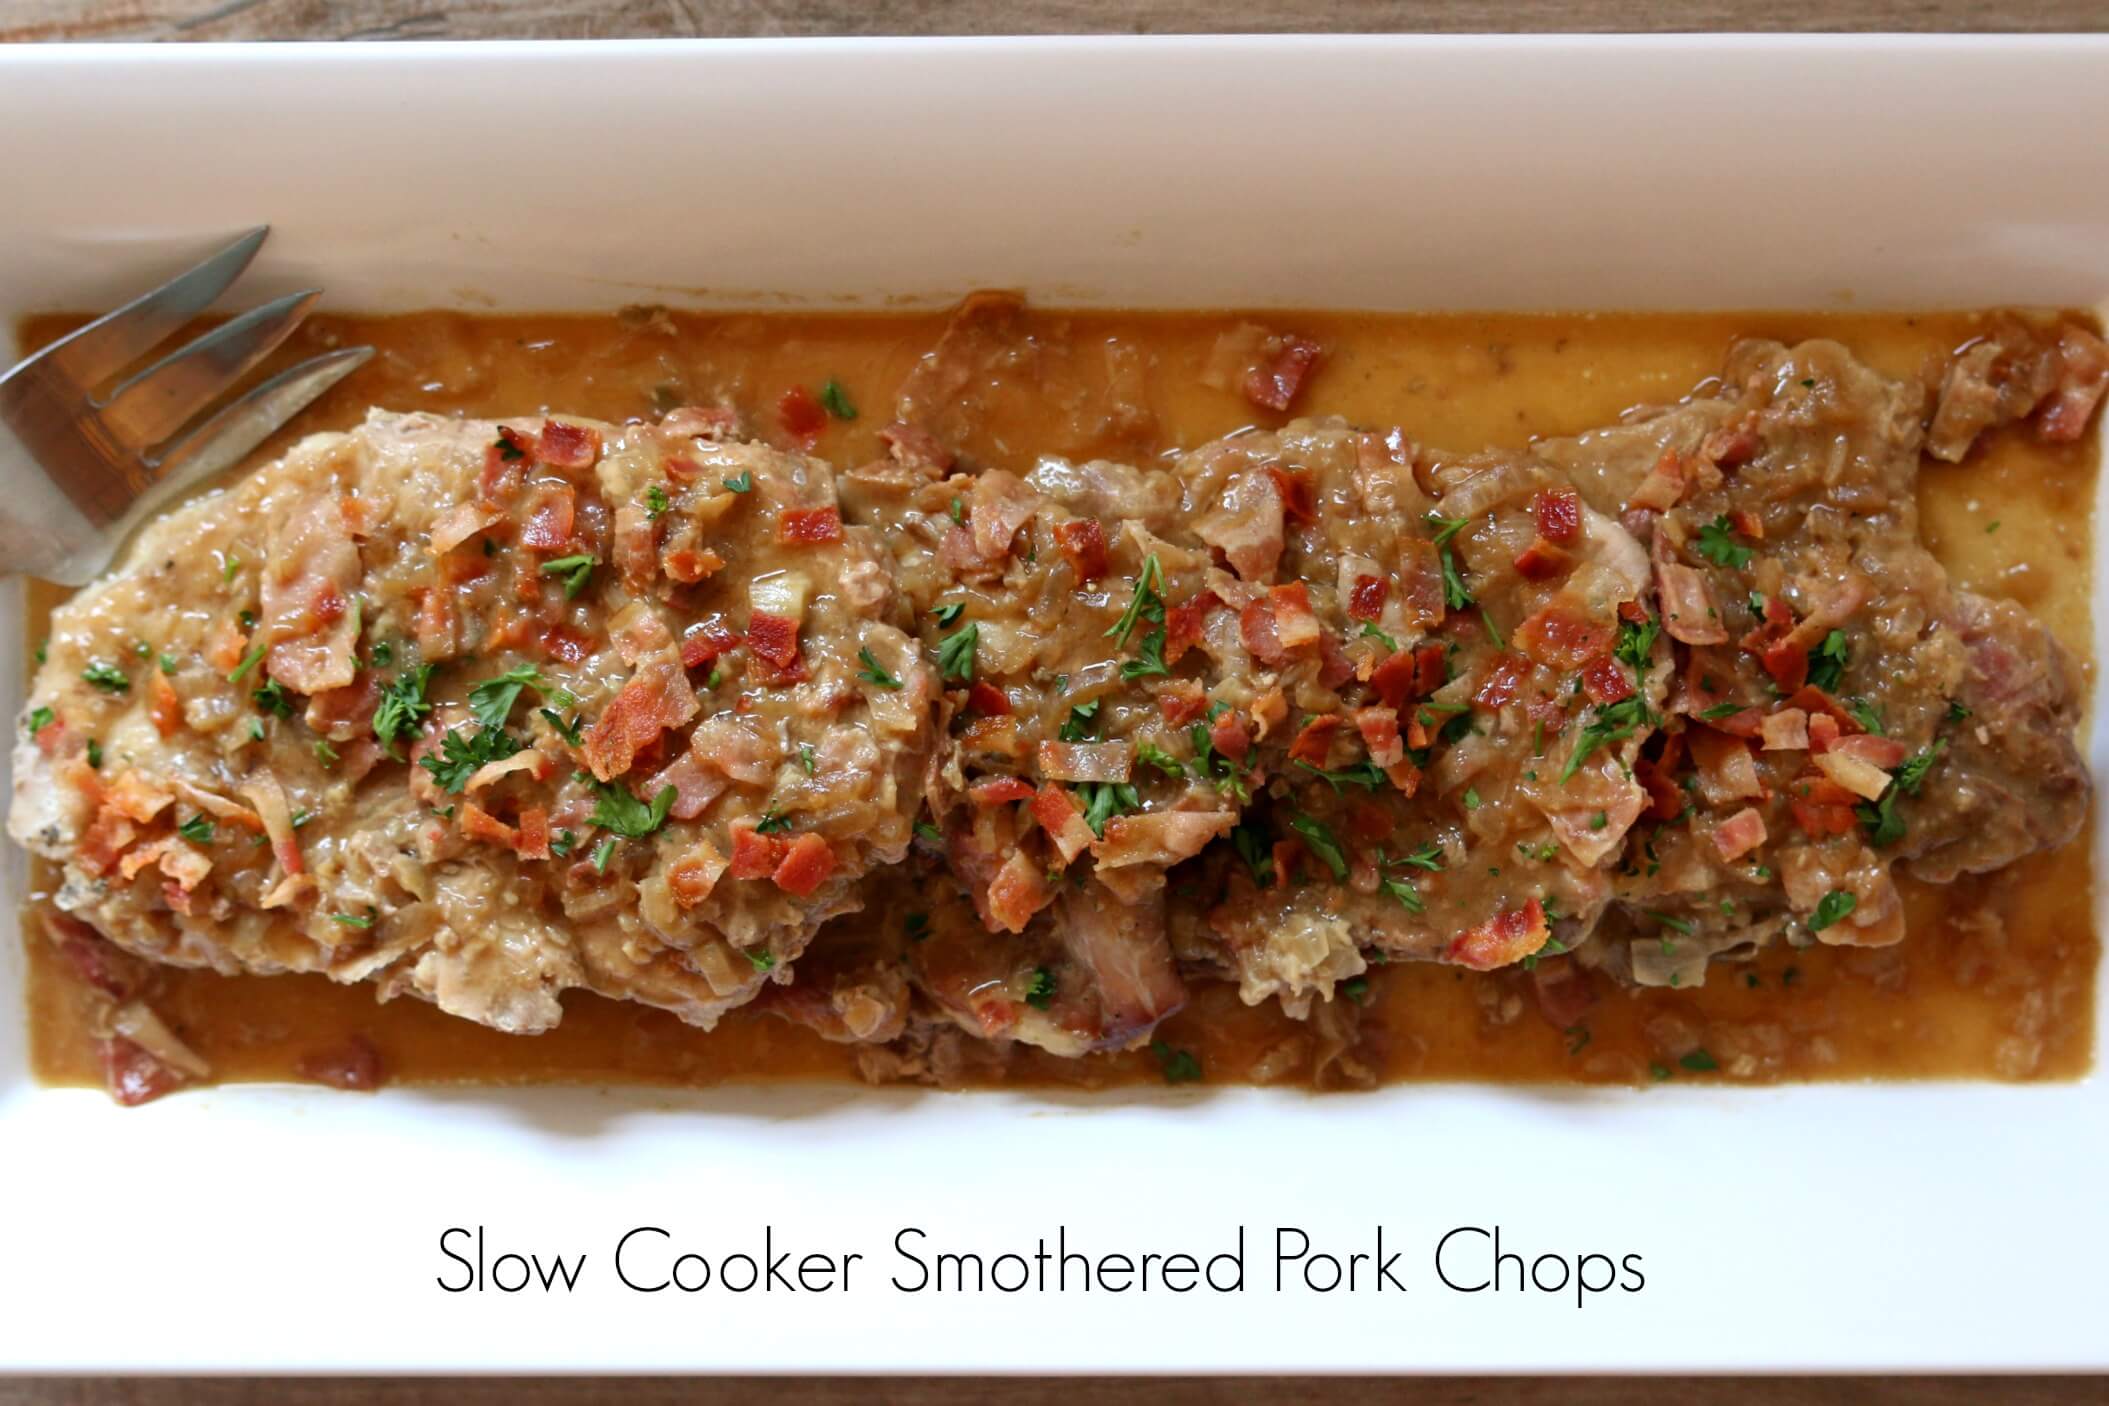 Slow Cooker Smothered Pork Chops with Bacon--the best slow cooker pork chops recipe ever! Tender pork smothered with savory sauce and bacon crumbles all made in your slow cooker. 